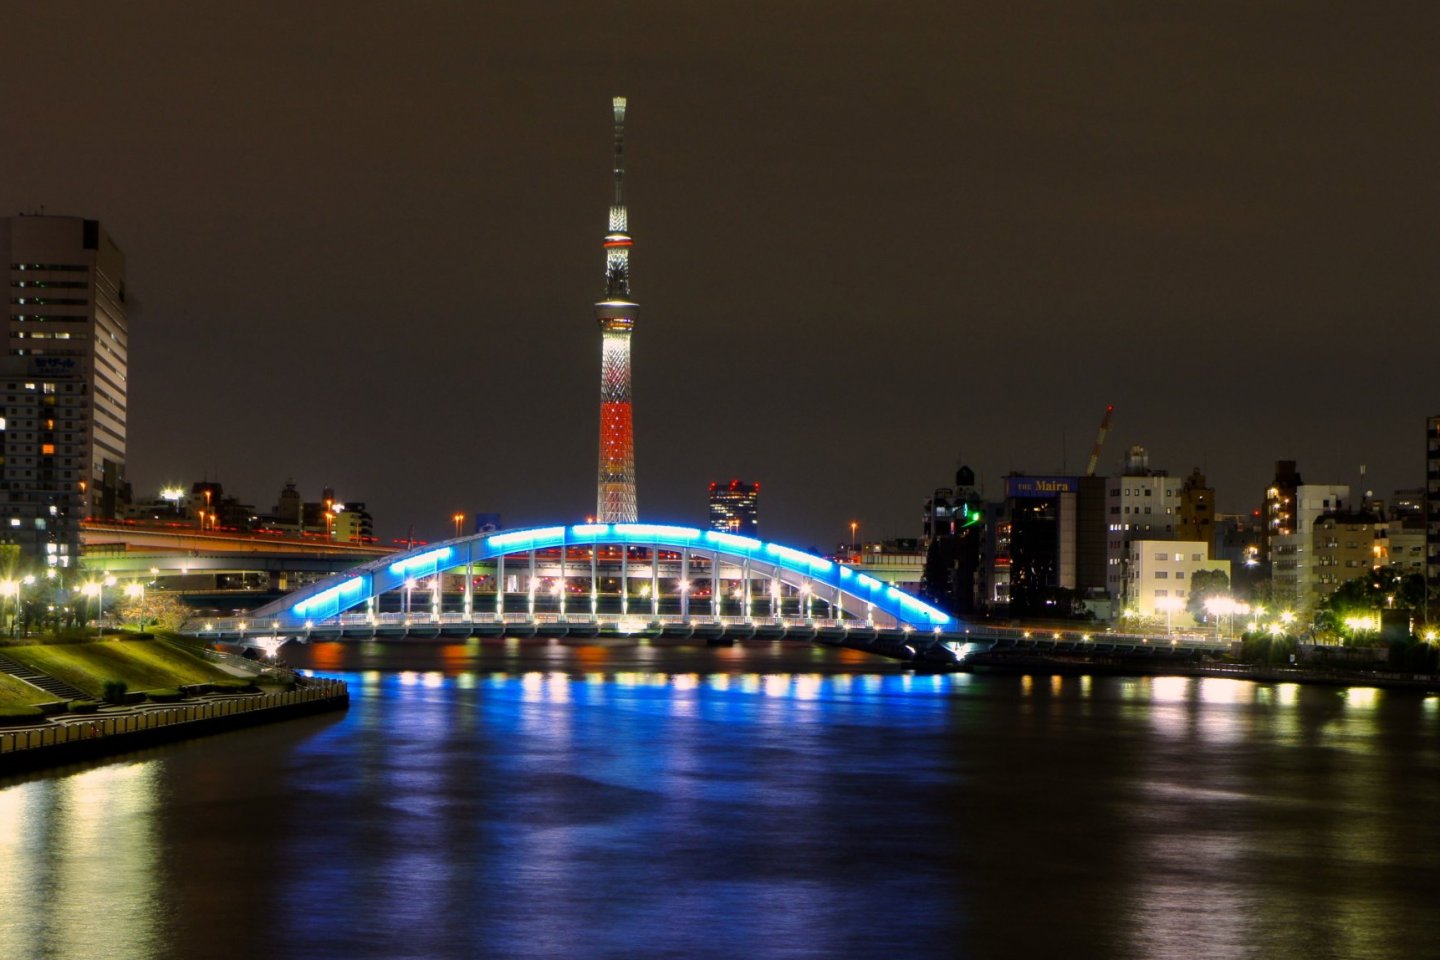 Skytree will be illuminated in two different ways during the festive season